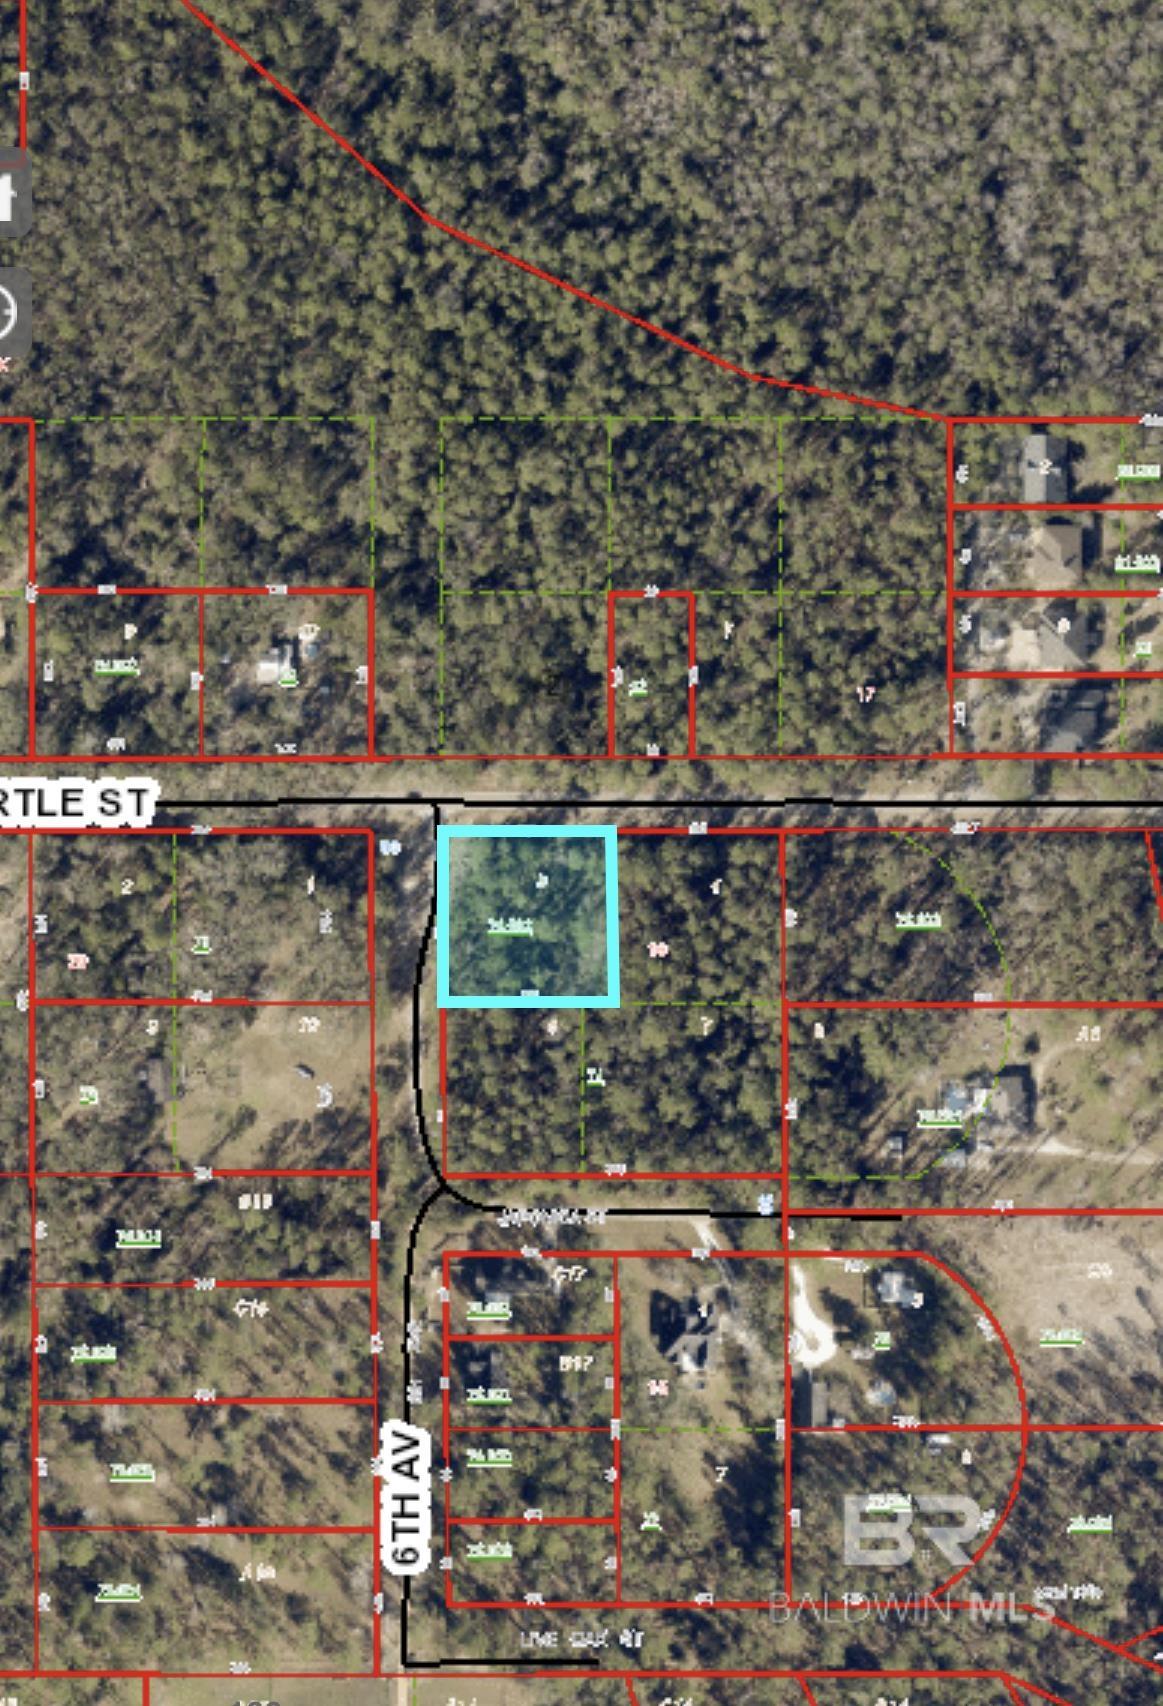 Great opportunity to buy a large corner lot in Fairhope! Property is minutes away from Fish River so use it however you see fit! Buyer and buyer's agent to verify all information.